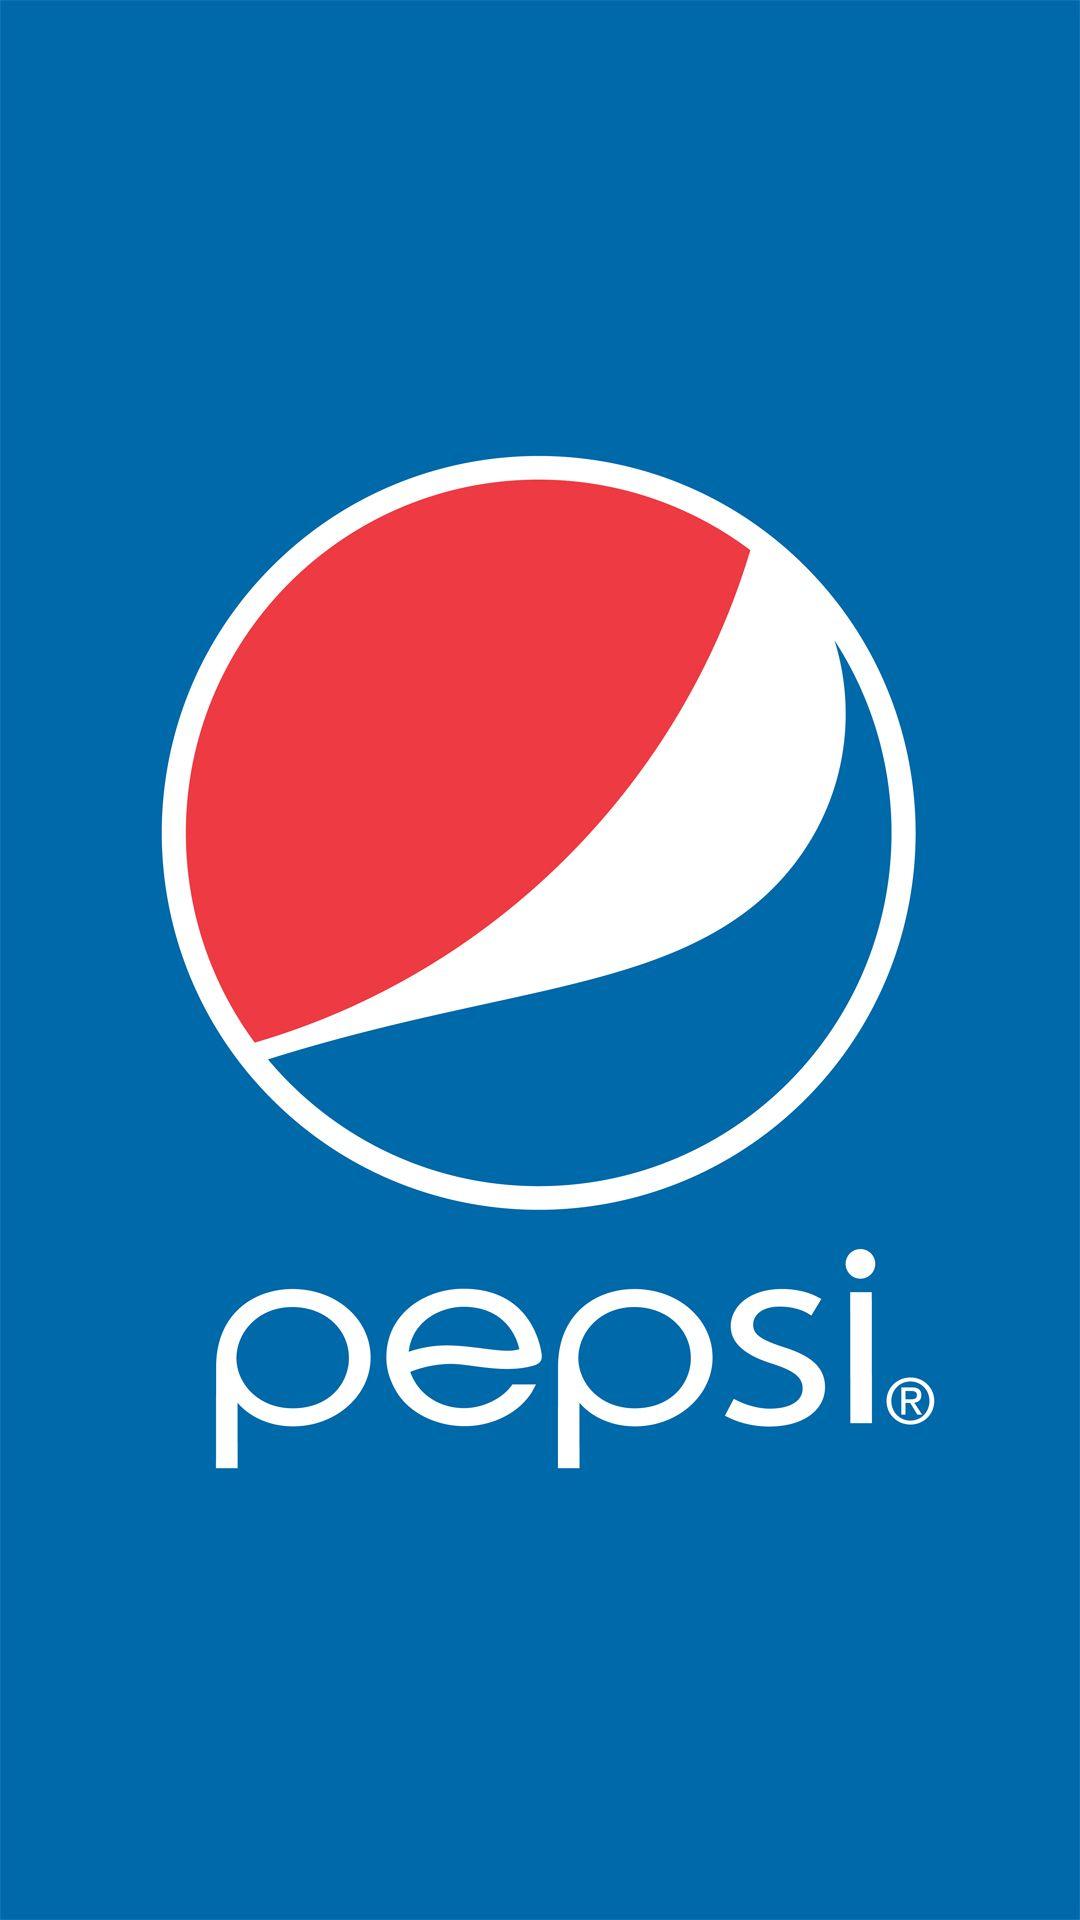 Pepsi One Logo - Pepsi logo htc one wallpaper ... - Abstract blue htc one wallpaper ...